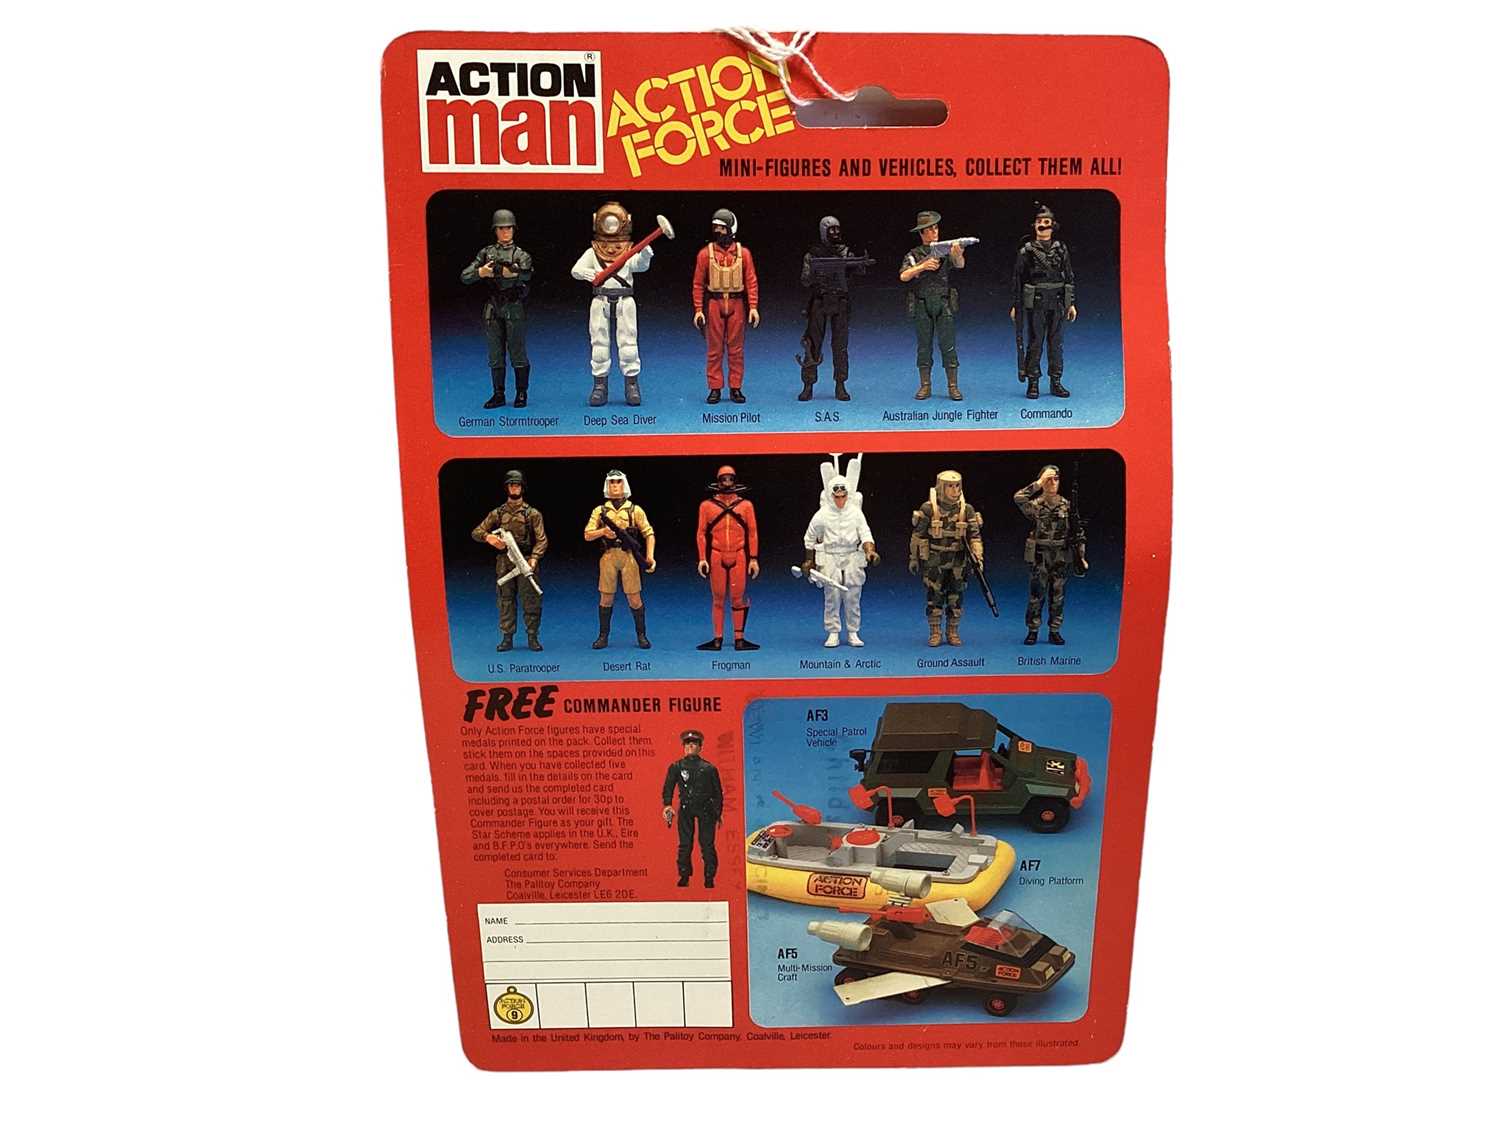 Palitoy Action Man Action Force Series 1 Mission Pilot, on card with blister pack (1) - Image 3 of 3